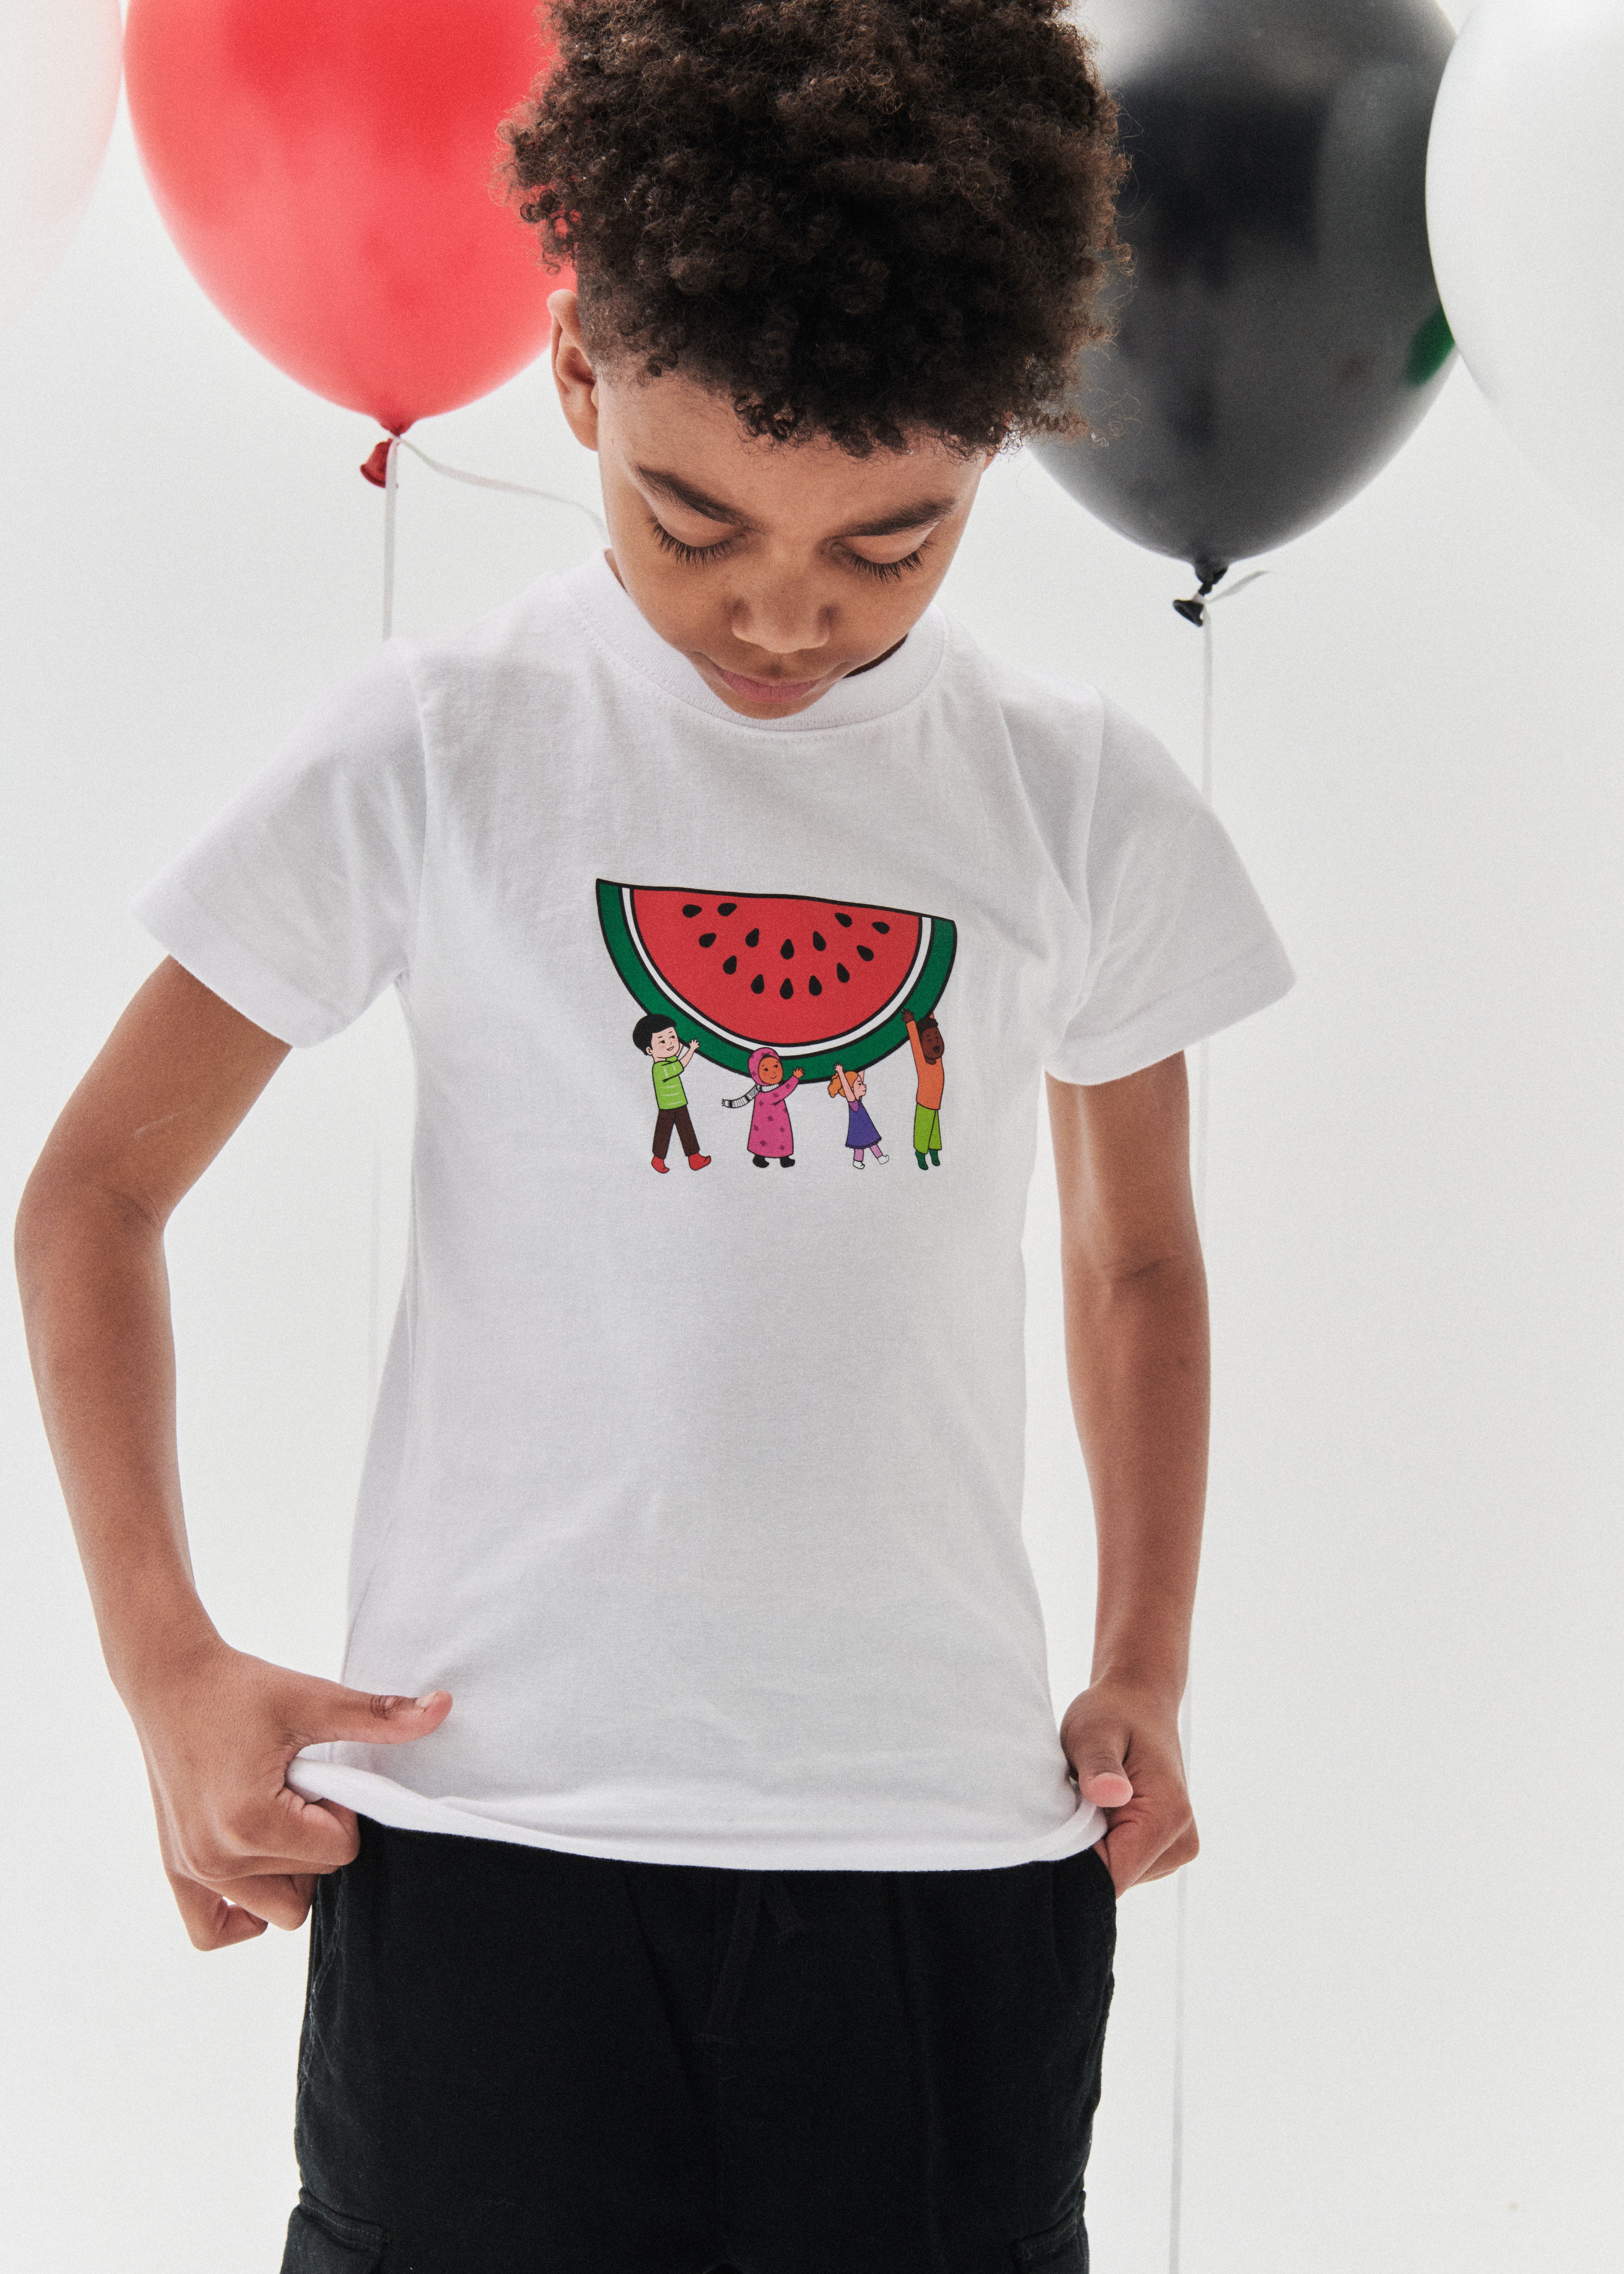 We are the seeds - Kids T-shirt